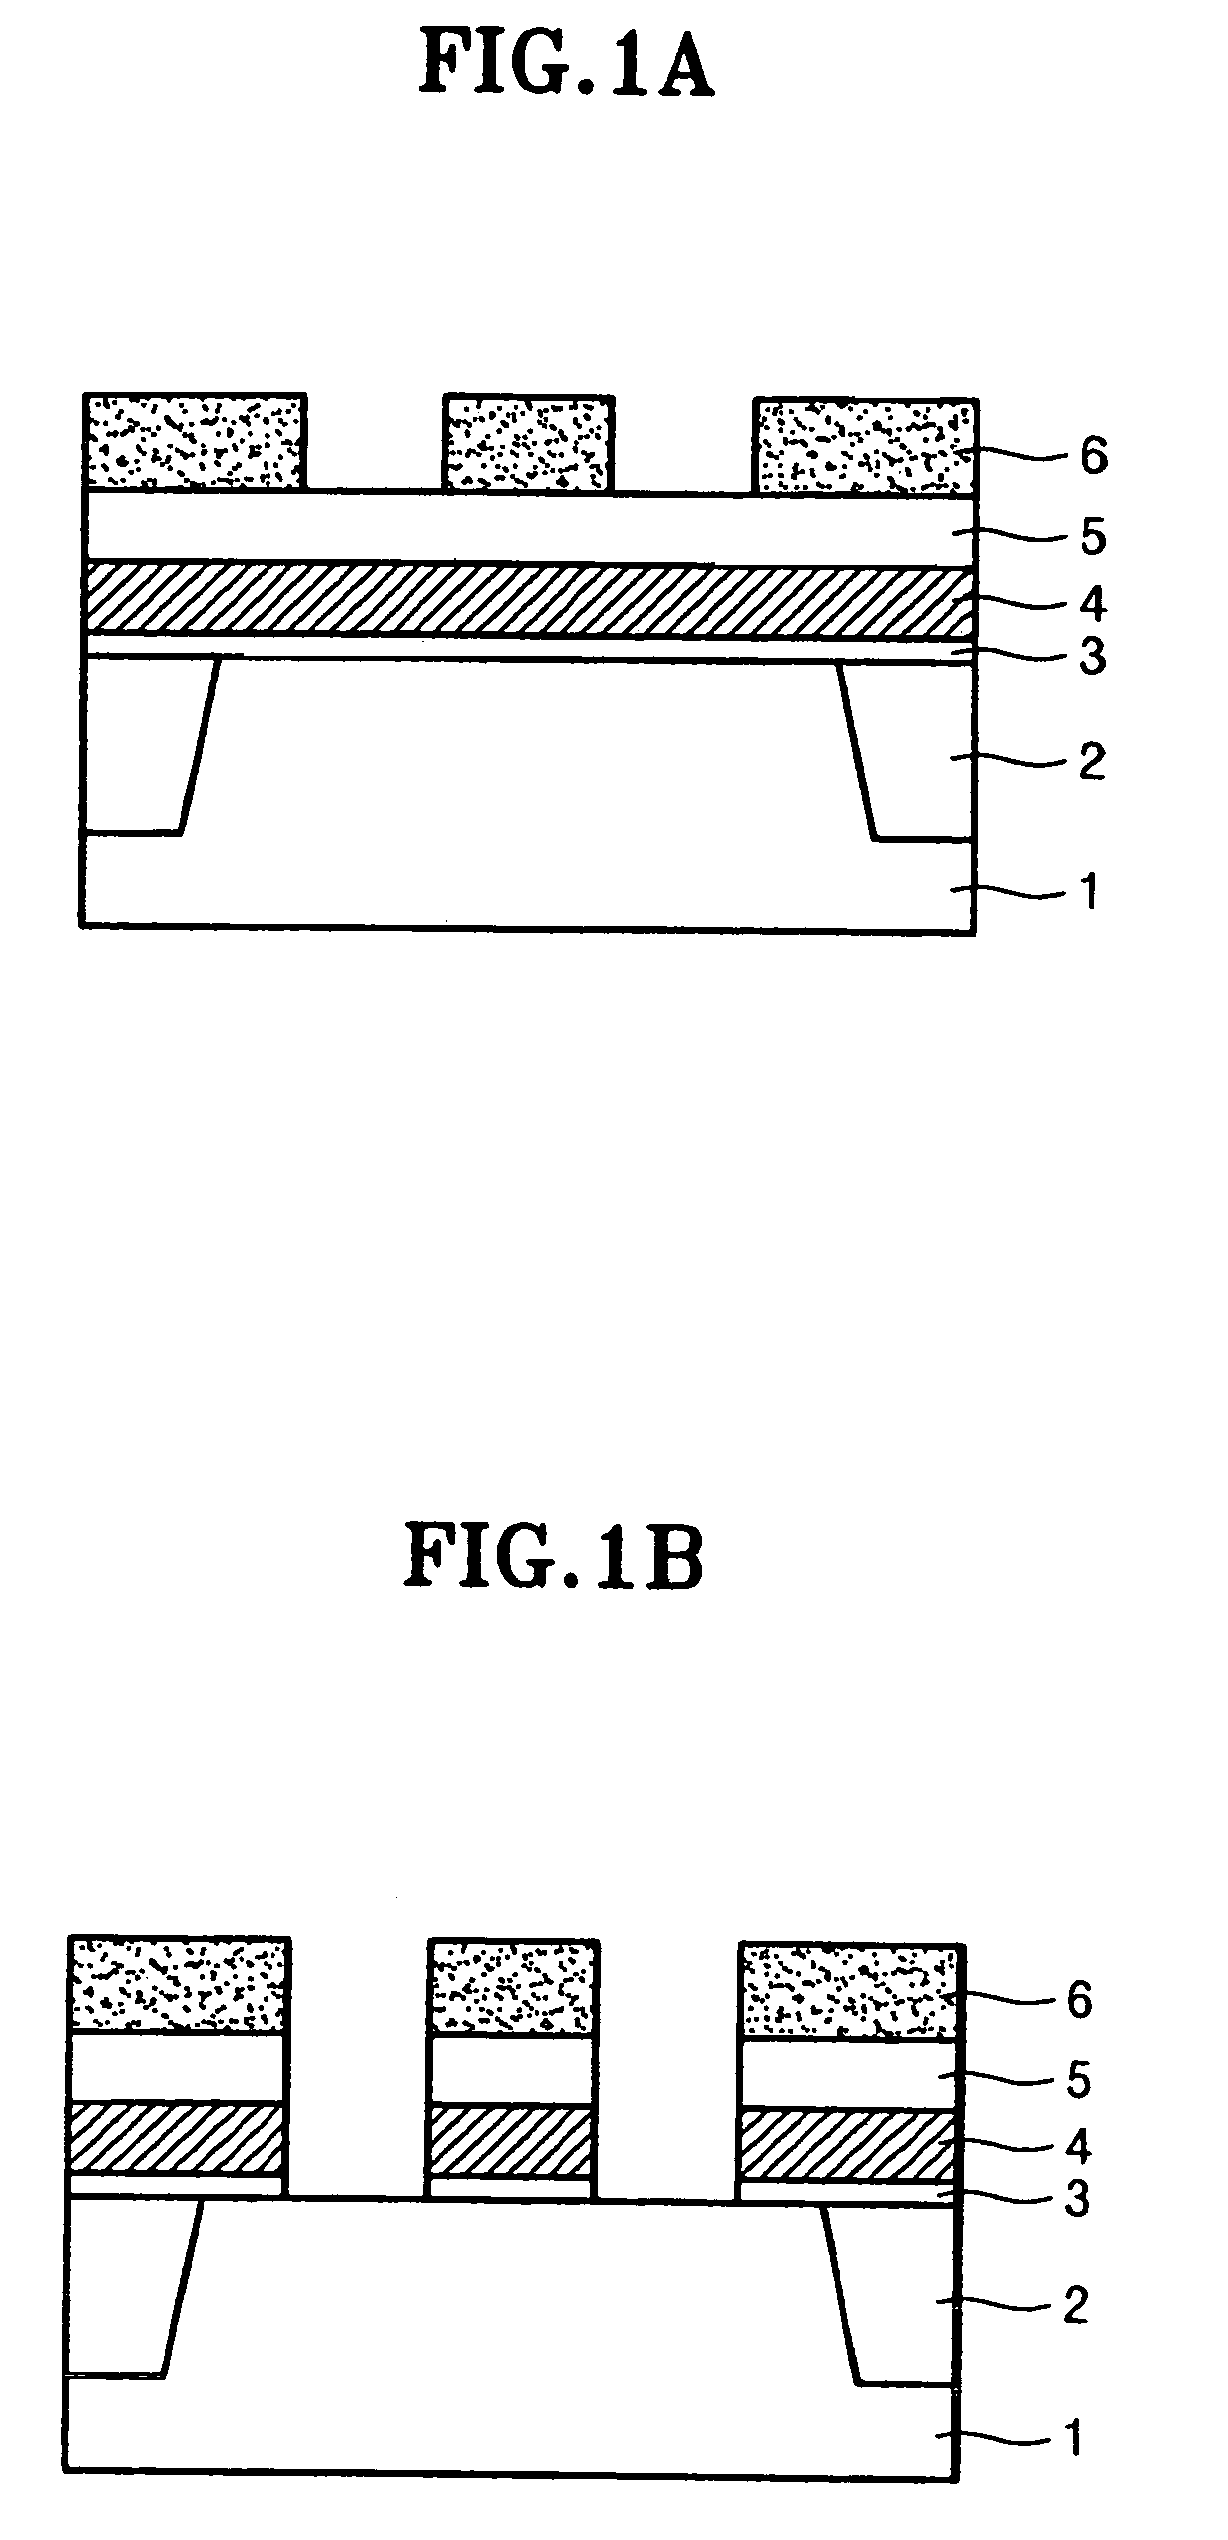 Method of manufacturing semiconductor device having recess gate structure with varying recess width for increased channel length